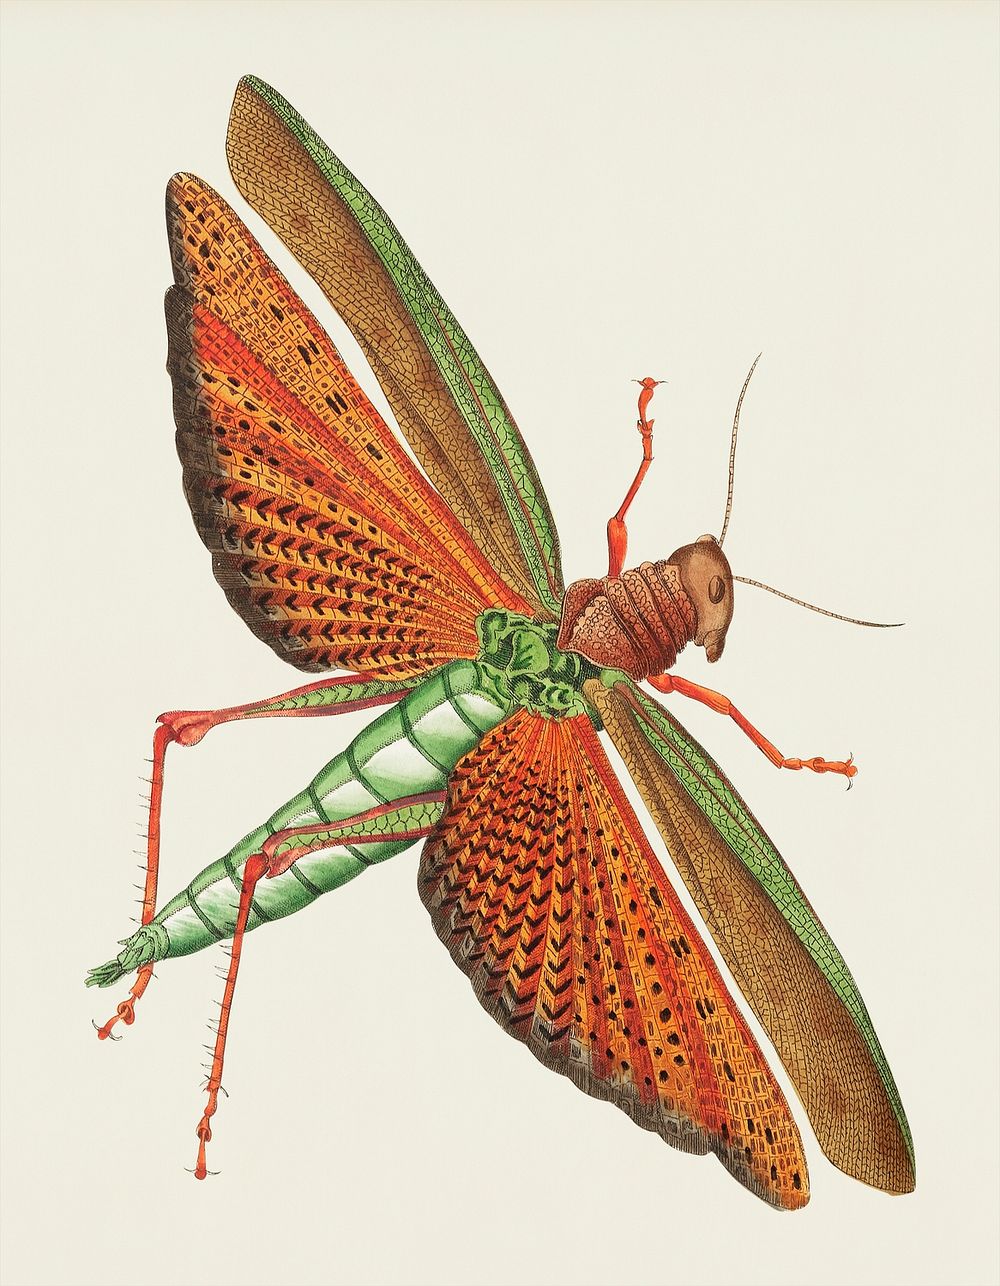 Imperial Locust illustration from The Naturalist's Miscellany (1789-1813) by George Shaw (1751-1813)